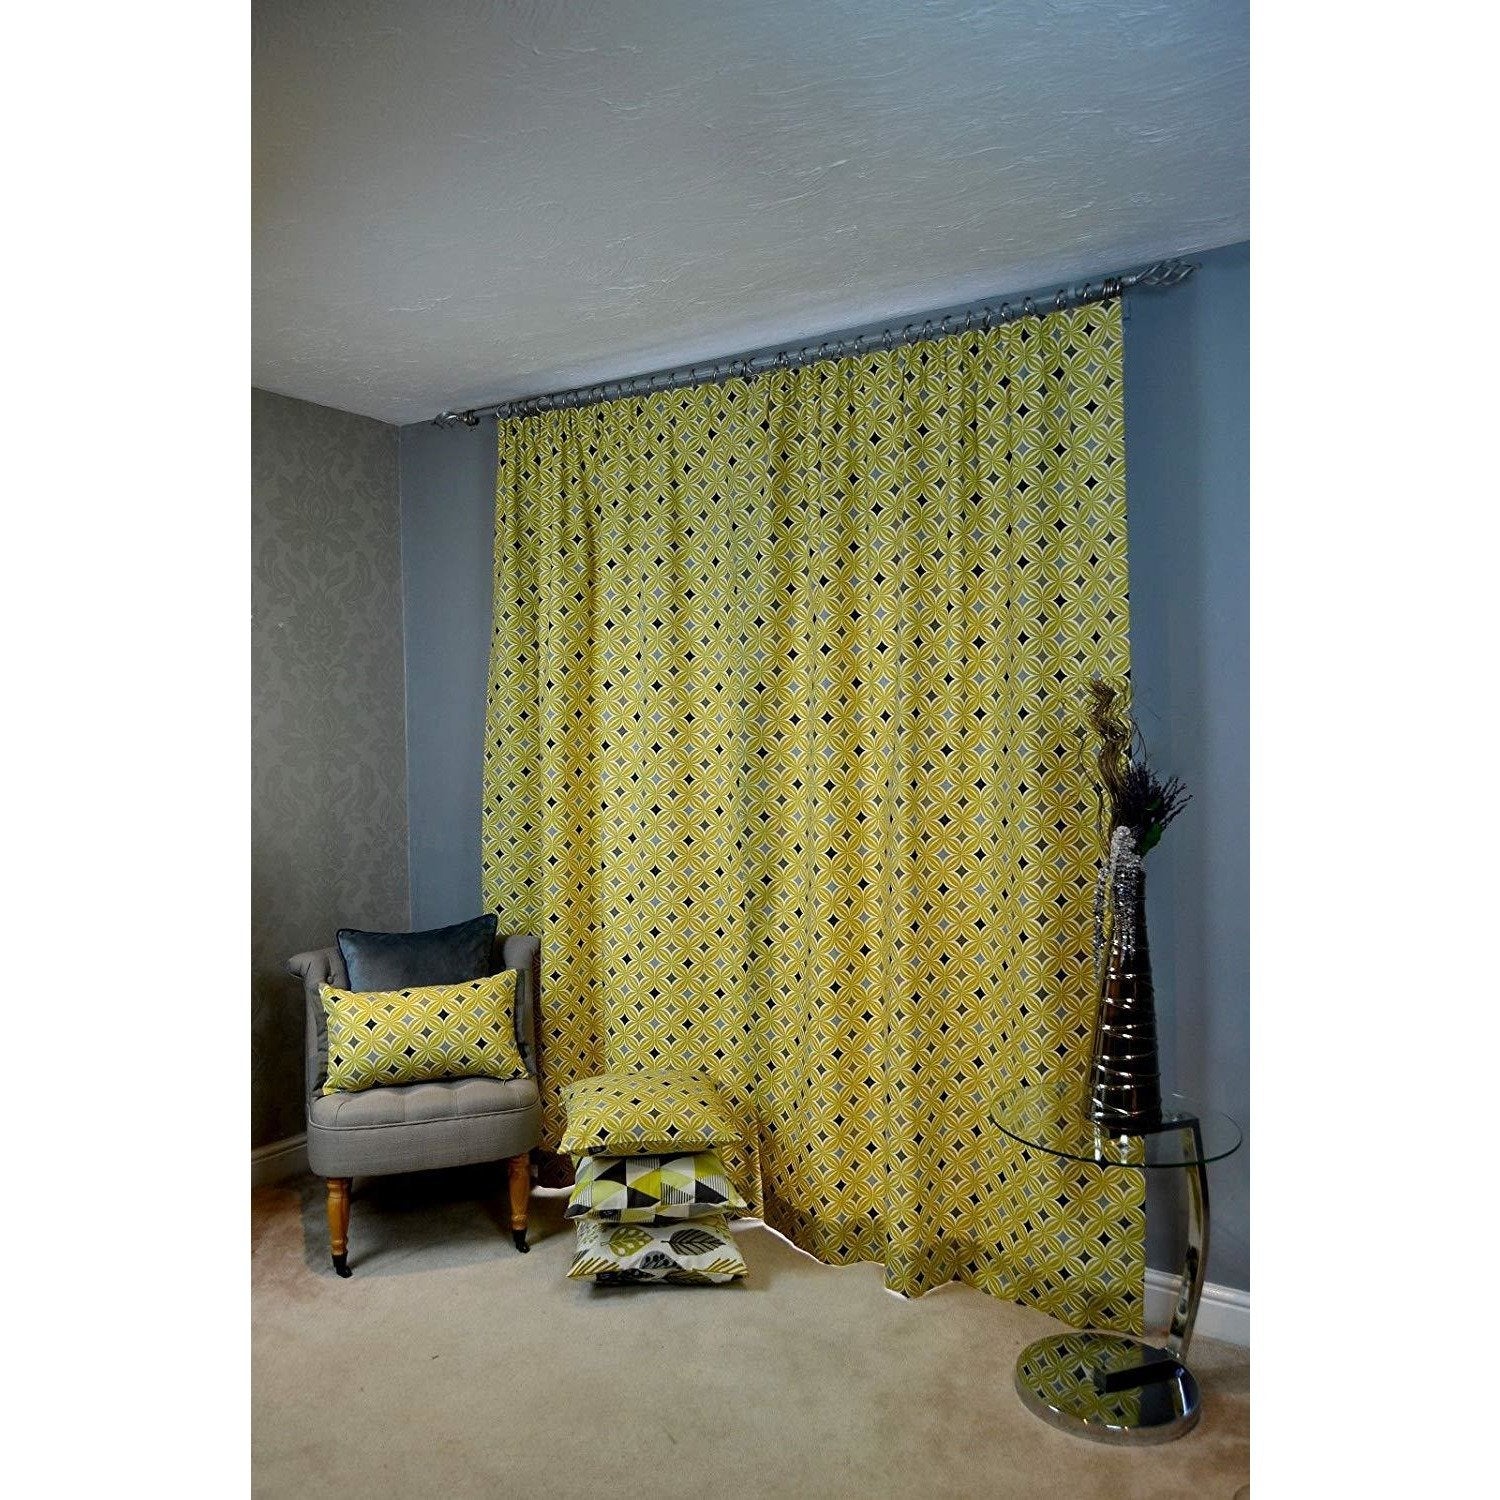 McAlister Textiles Laila Cotton Ochre Yellow Curtains Tailored Curtains 